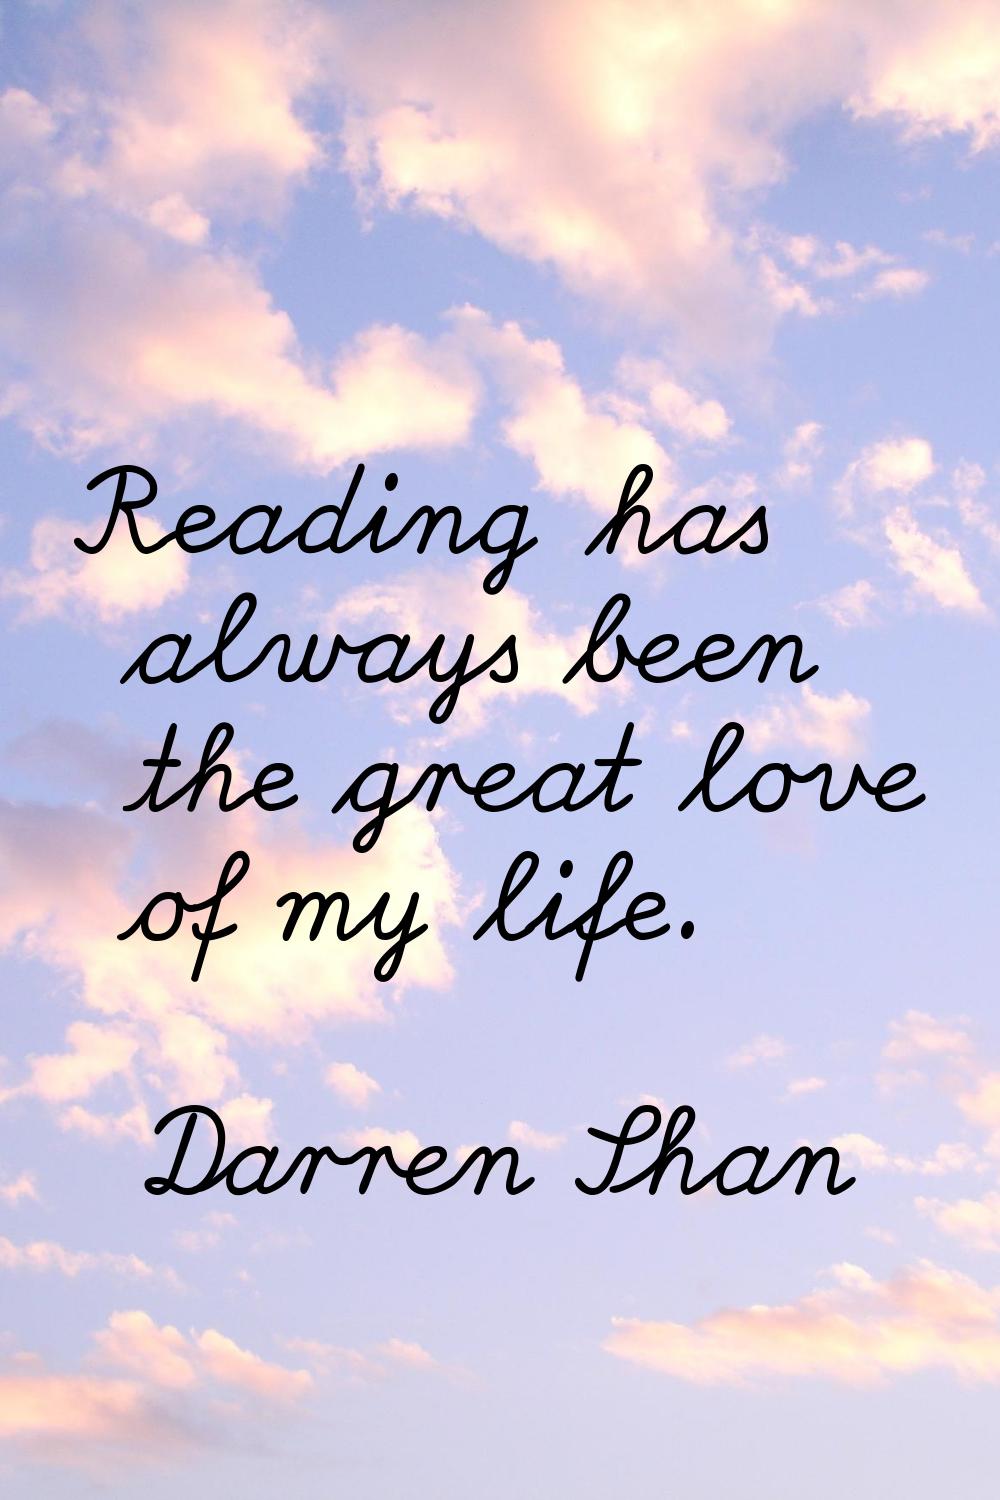 Reading has always been the great love of my life.